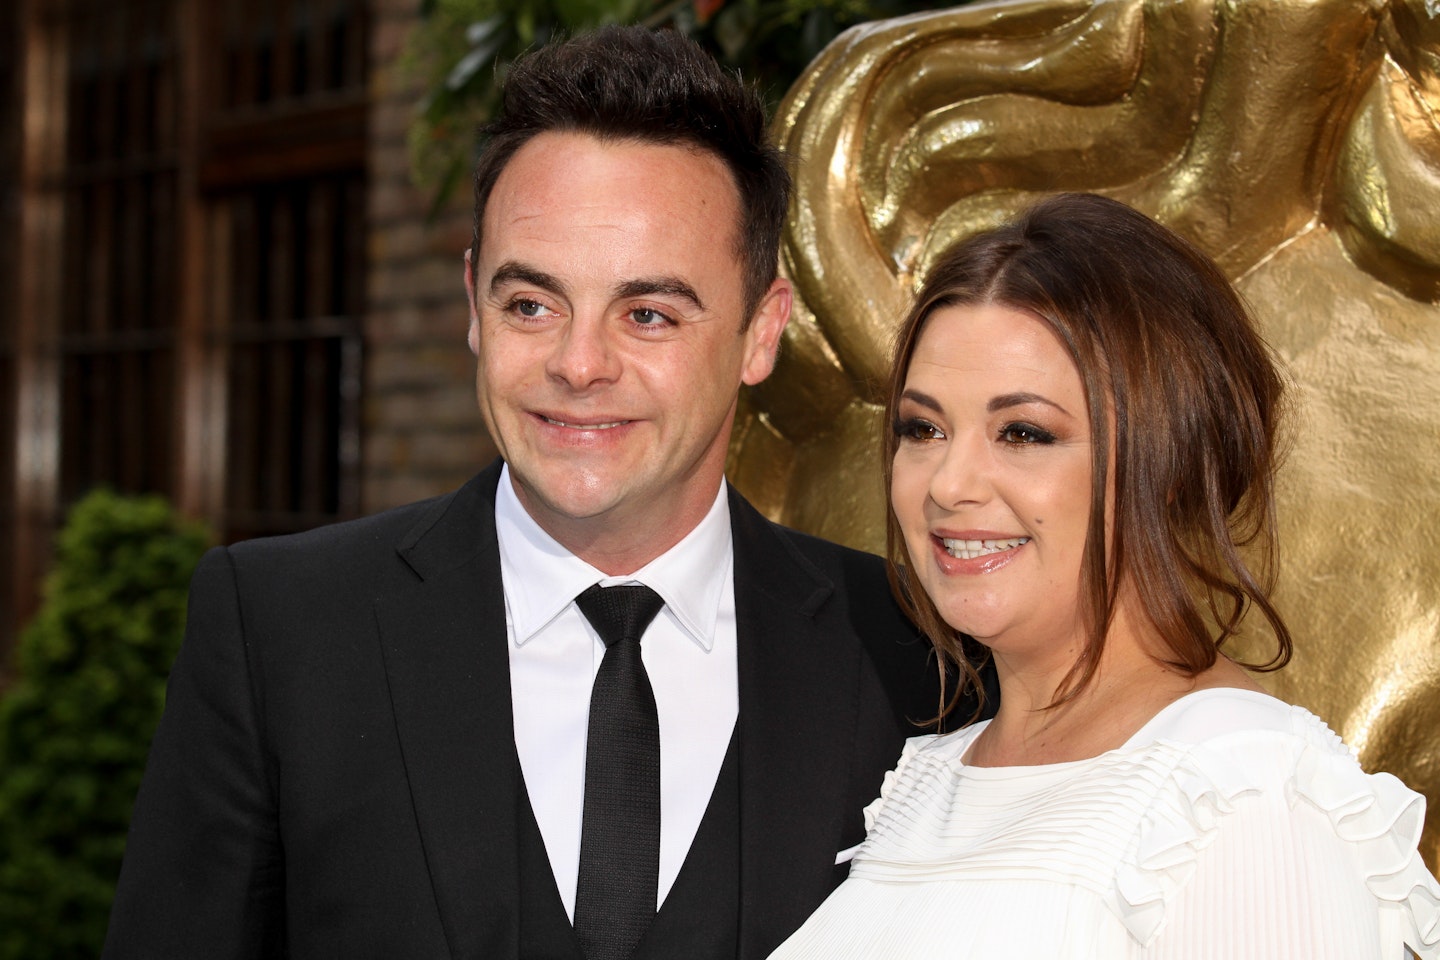 Ant McPartlin and wife Lisa Armstrong